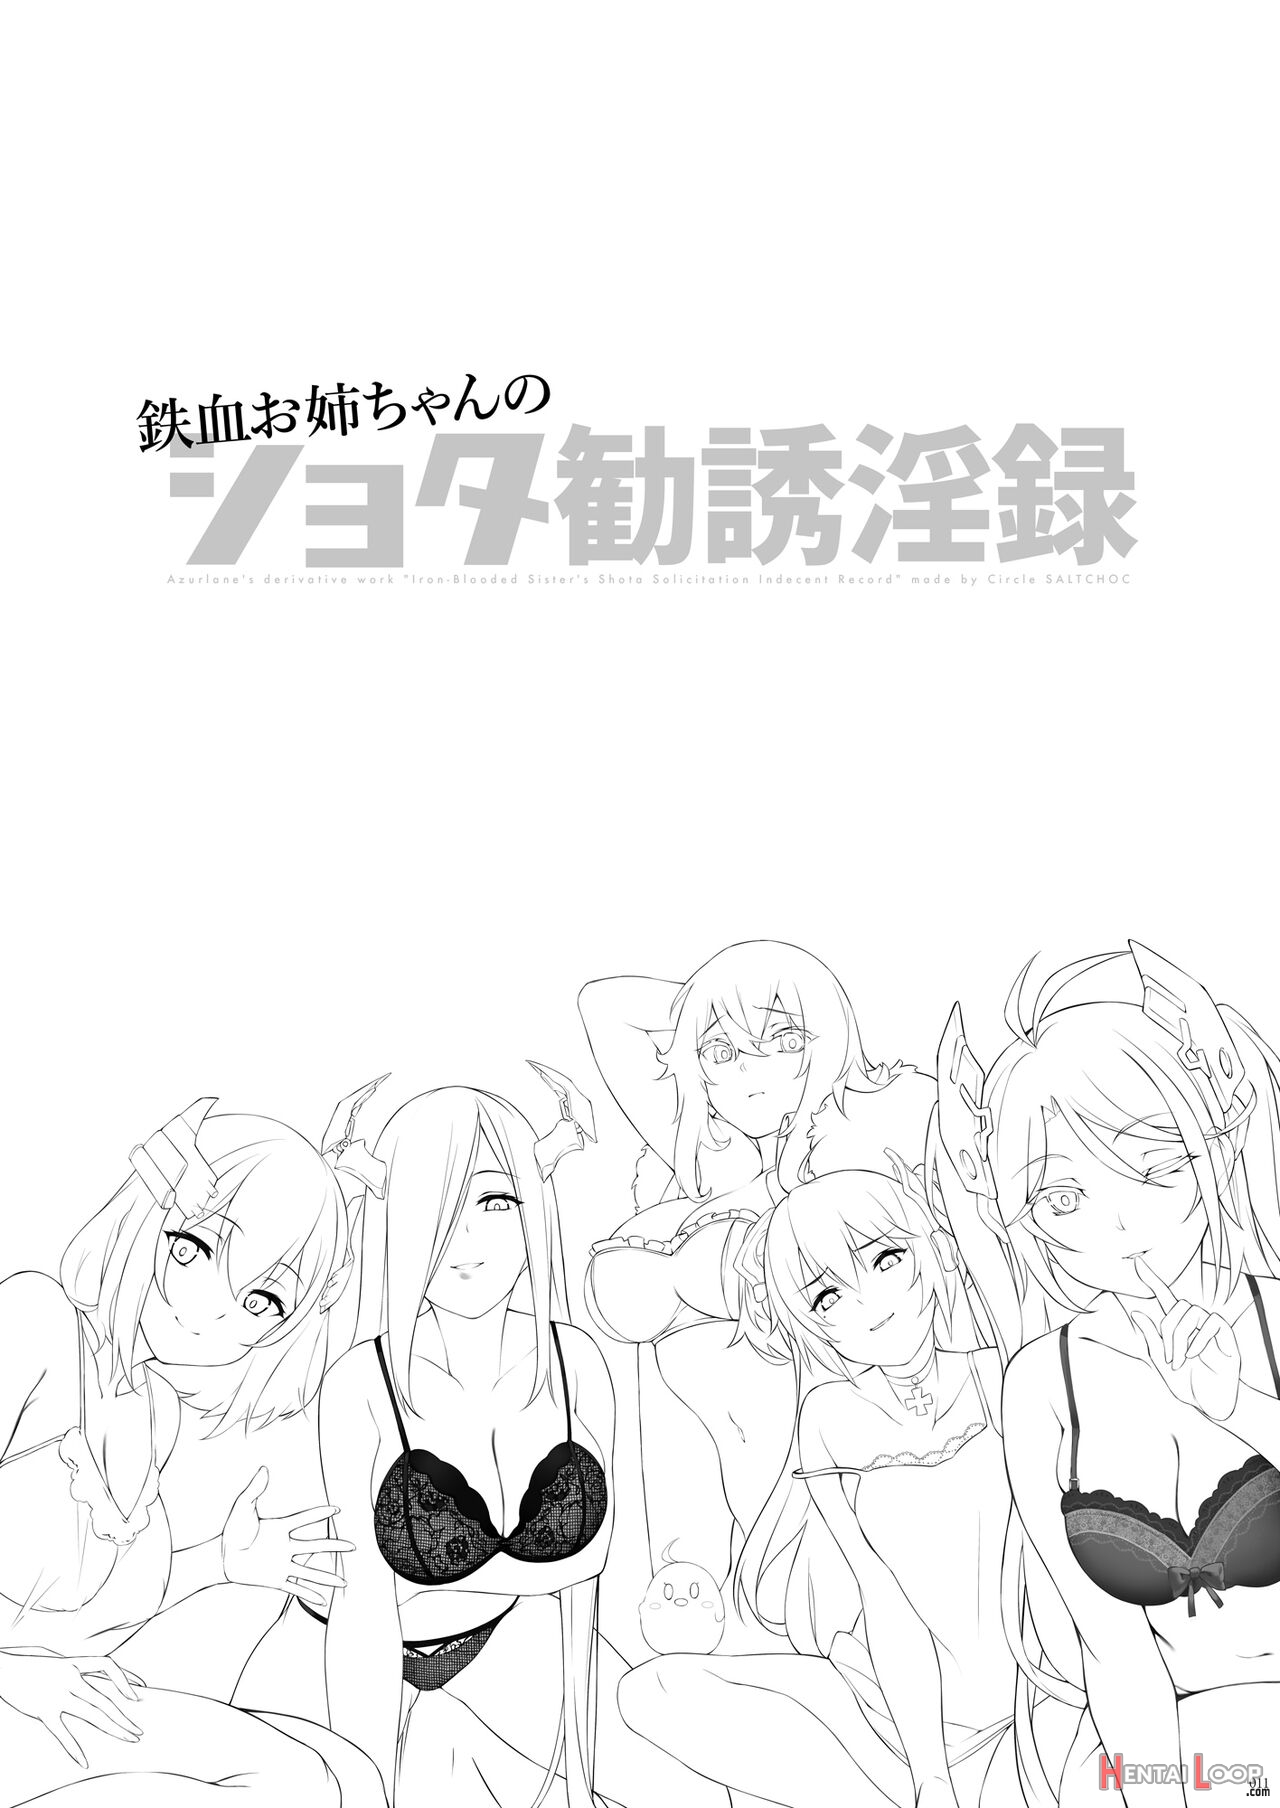 Iron-blooded Sister's Shota Solicitation Indecent Record page 11